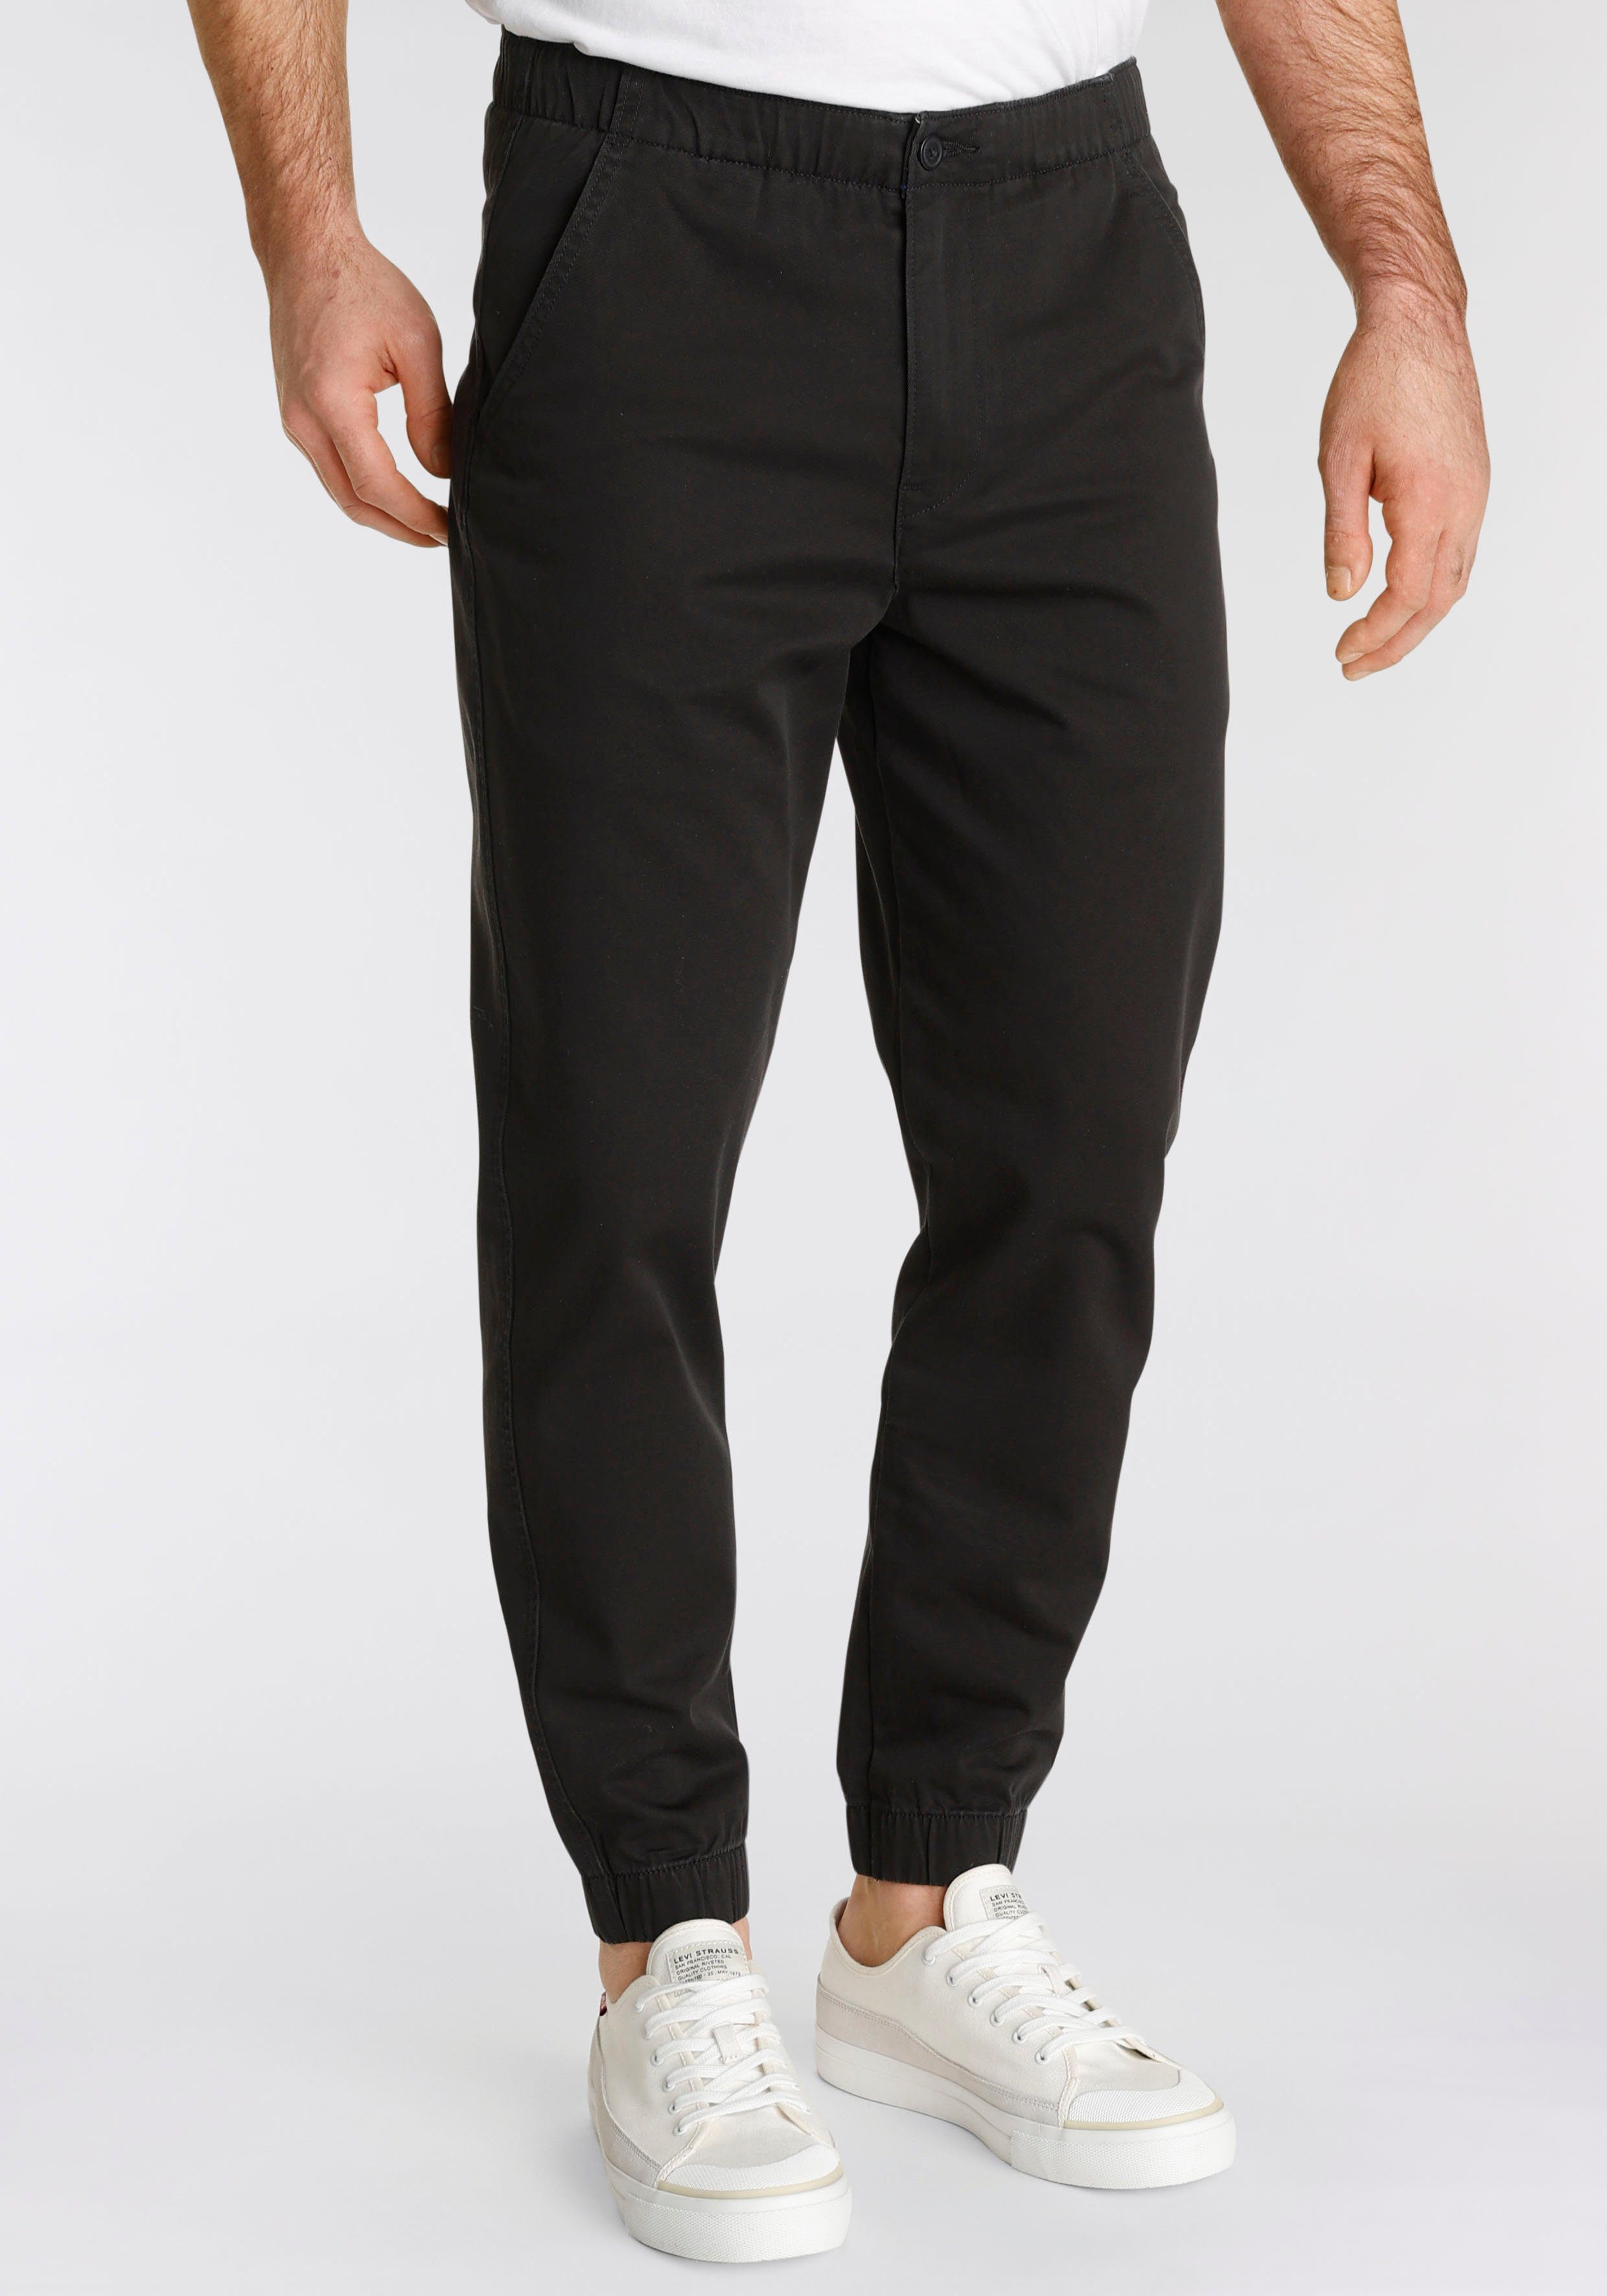 Chinohose LE CHINO JOGGER schwarz III in Levi's® Styling XX leichtes für Unifarbe